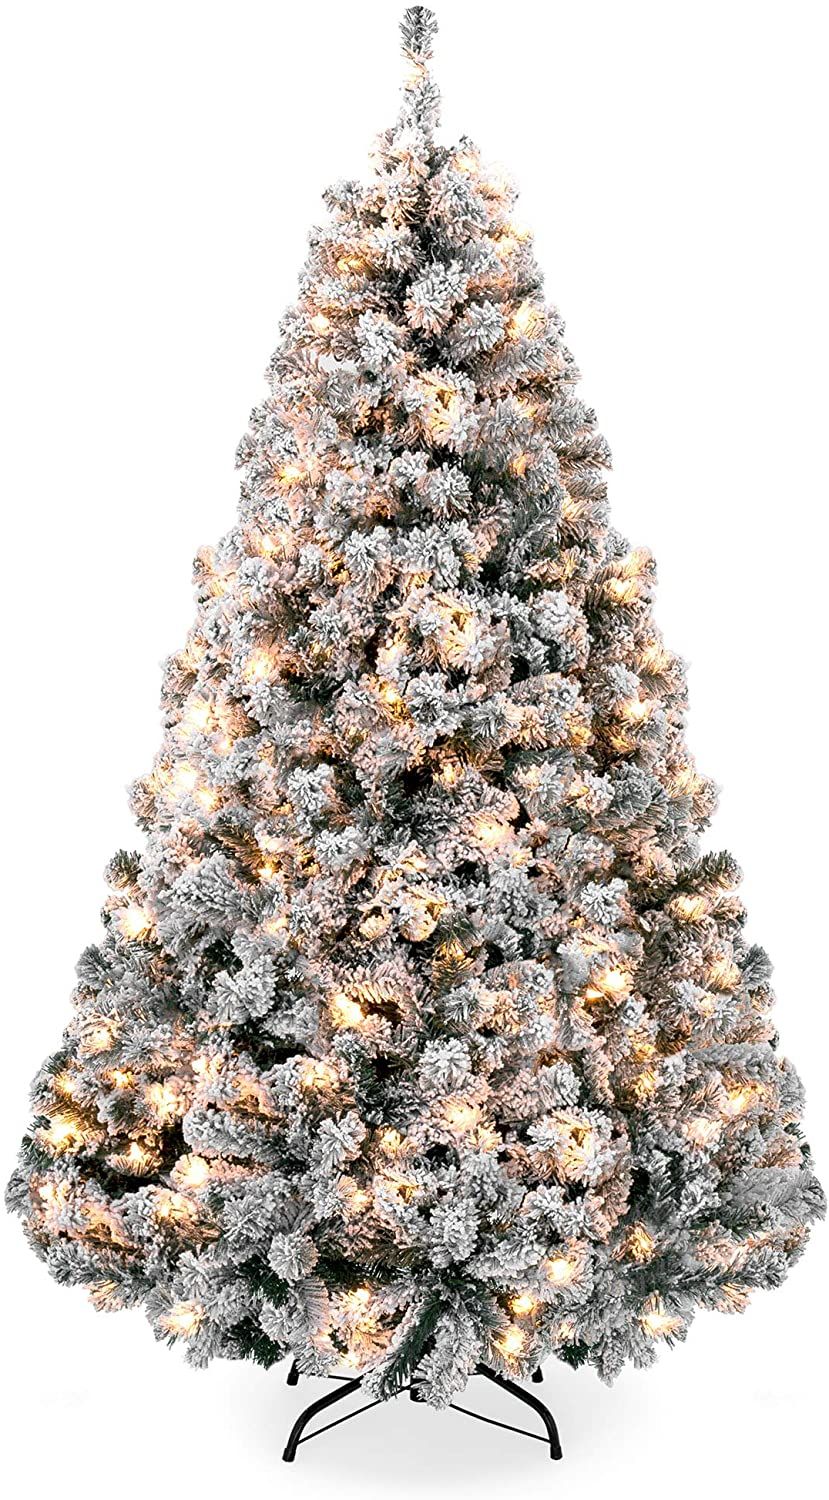 7.5ft Pre-Lit Snow Flocked Artificial Christmas Pine Tree Holiday Decor w/ 550 Warm White Lights - $$title$$